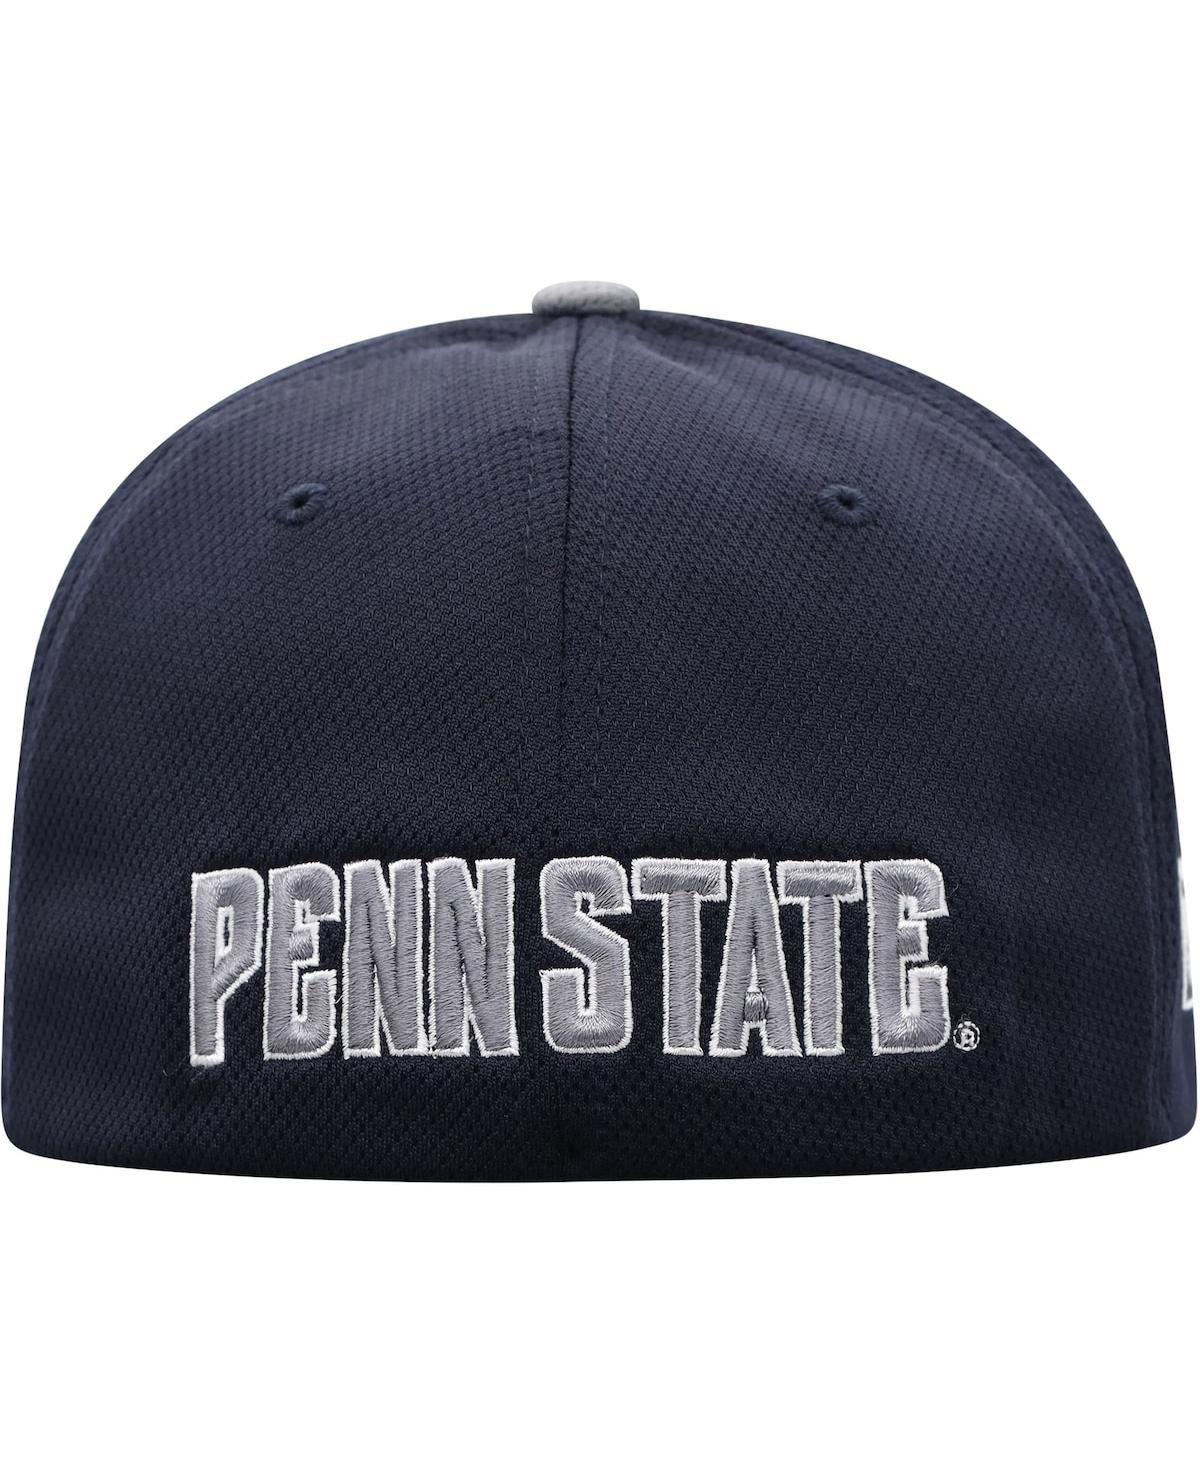 Shop Top Of The World Men's  Navy, Gray Penn State Nittany Lions Two-tone Reflex Hybrid Tech Flex Hat In Navy,gray